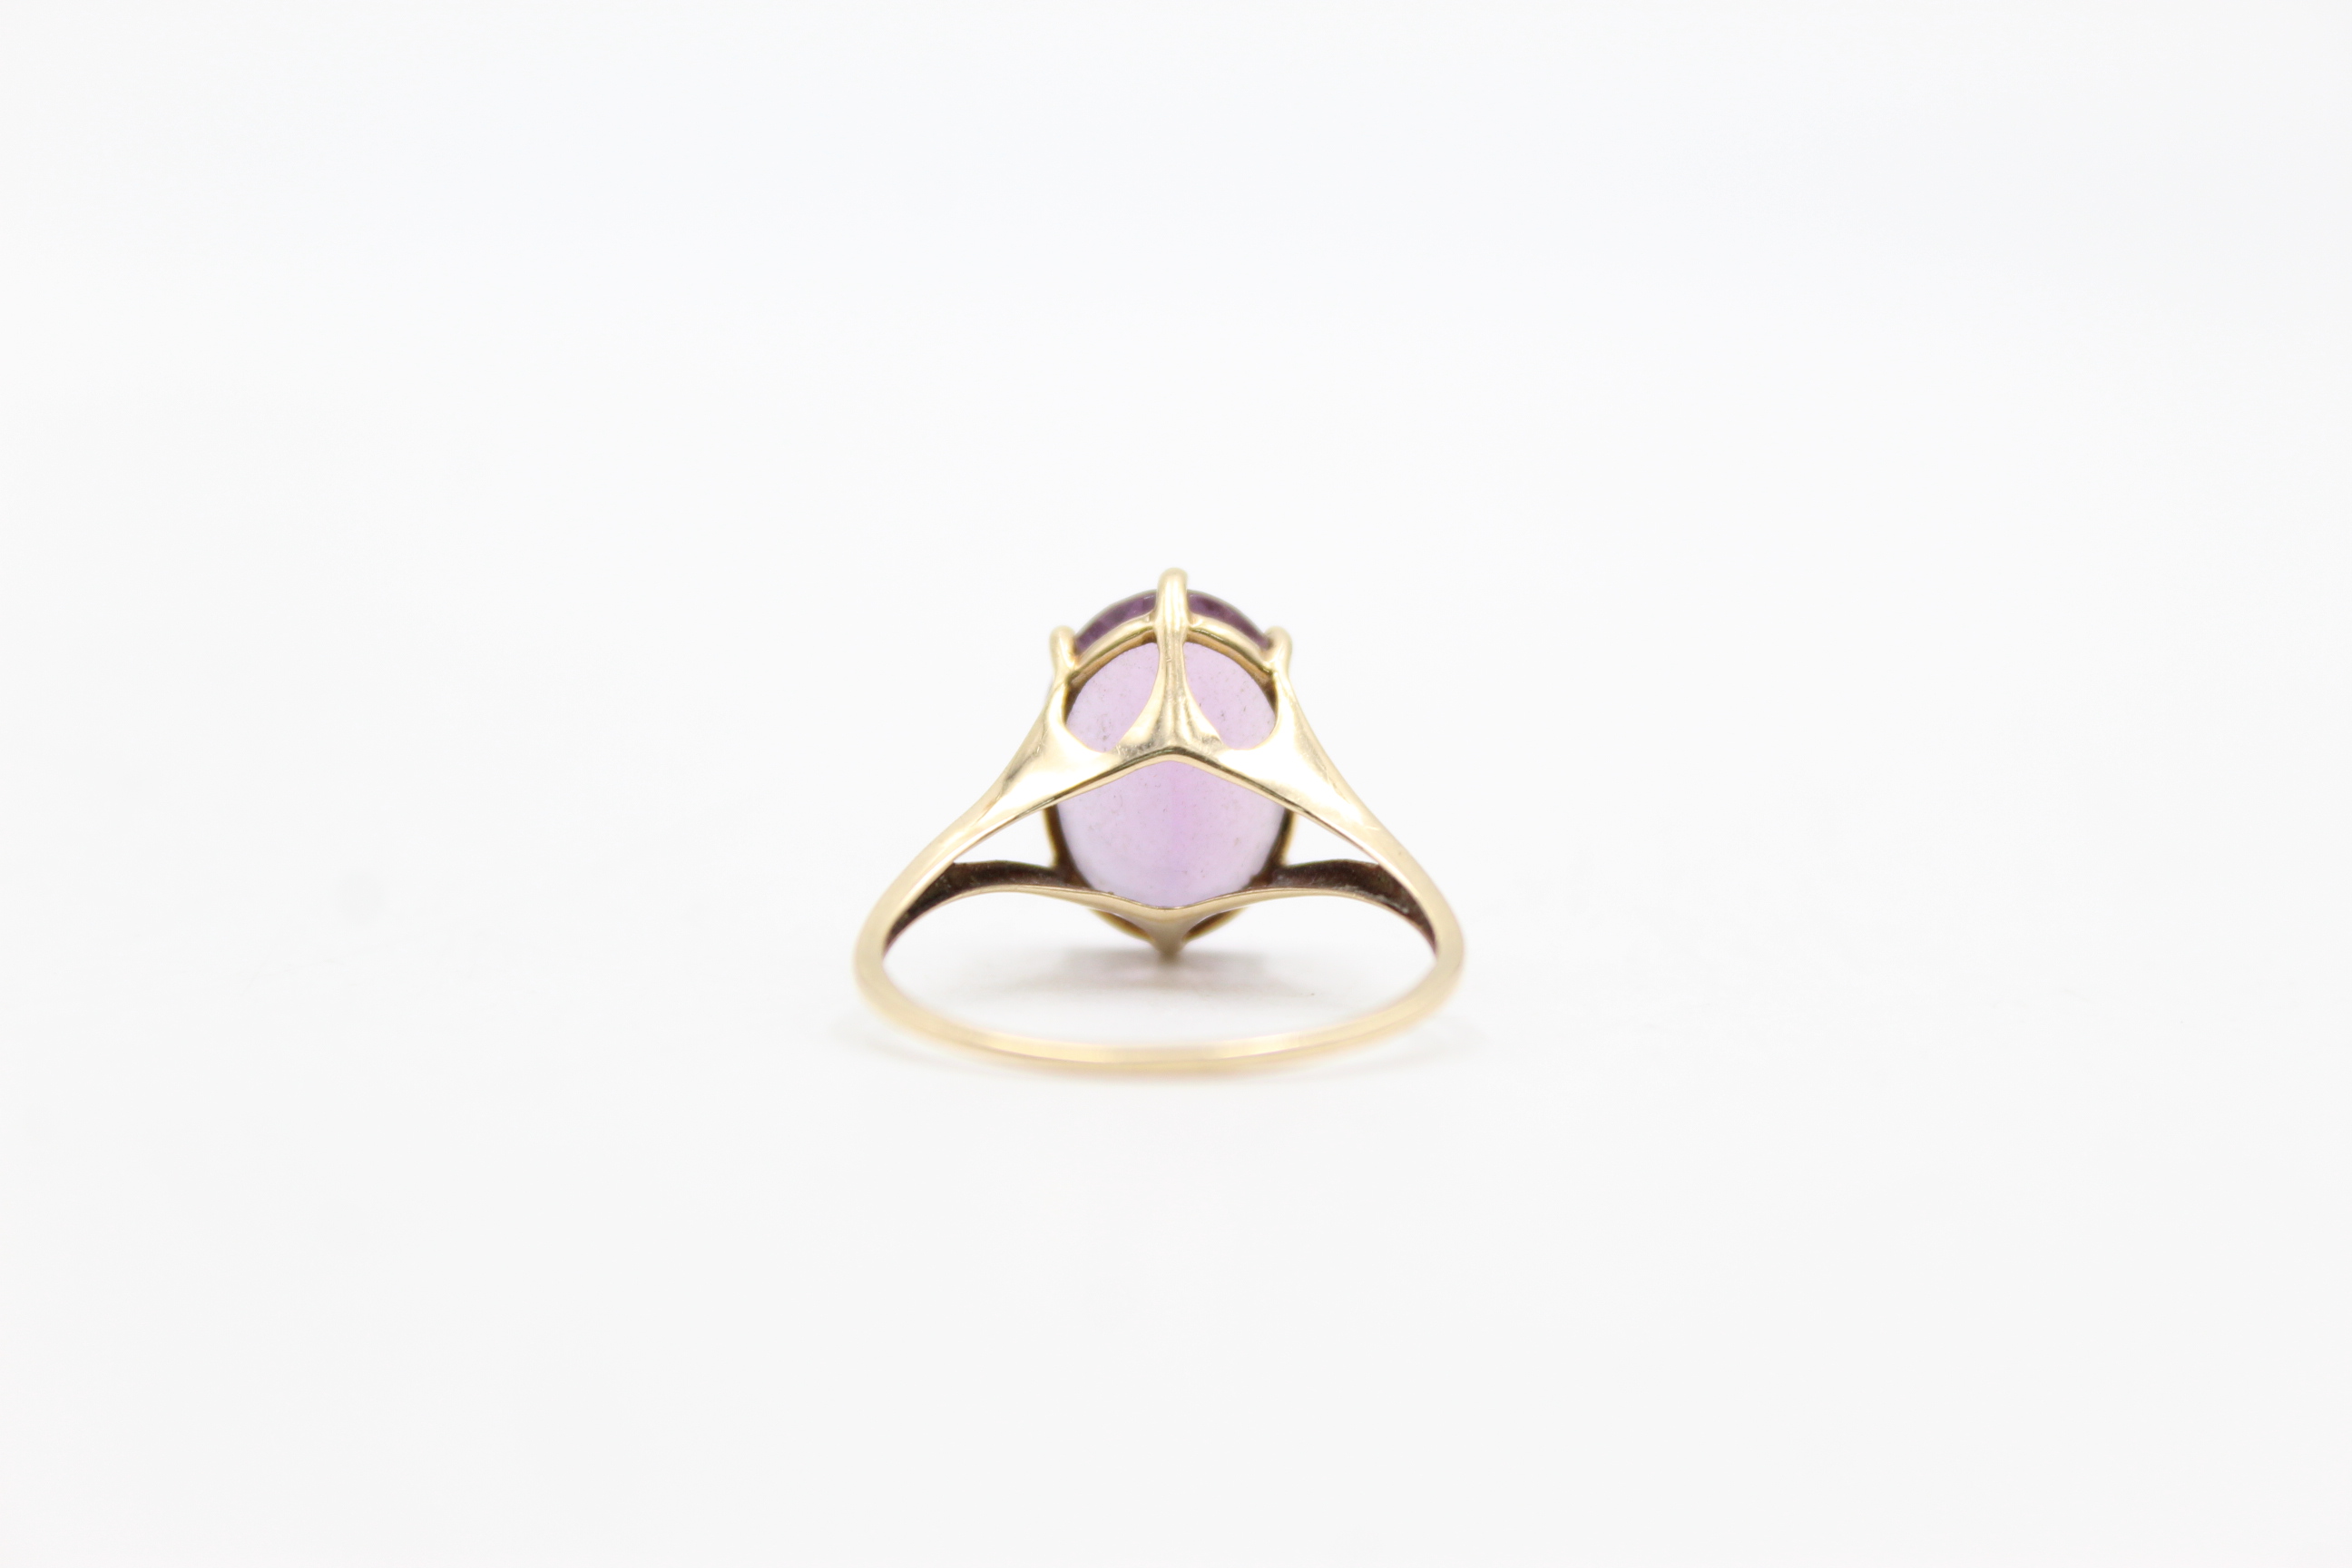 9ct gold amethyst solitaire dress ring (2.6g) - Image 5 of 7